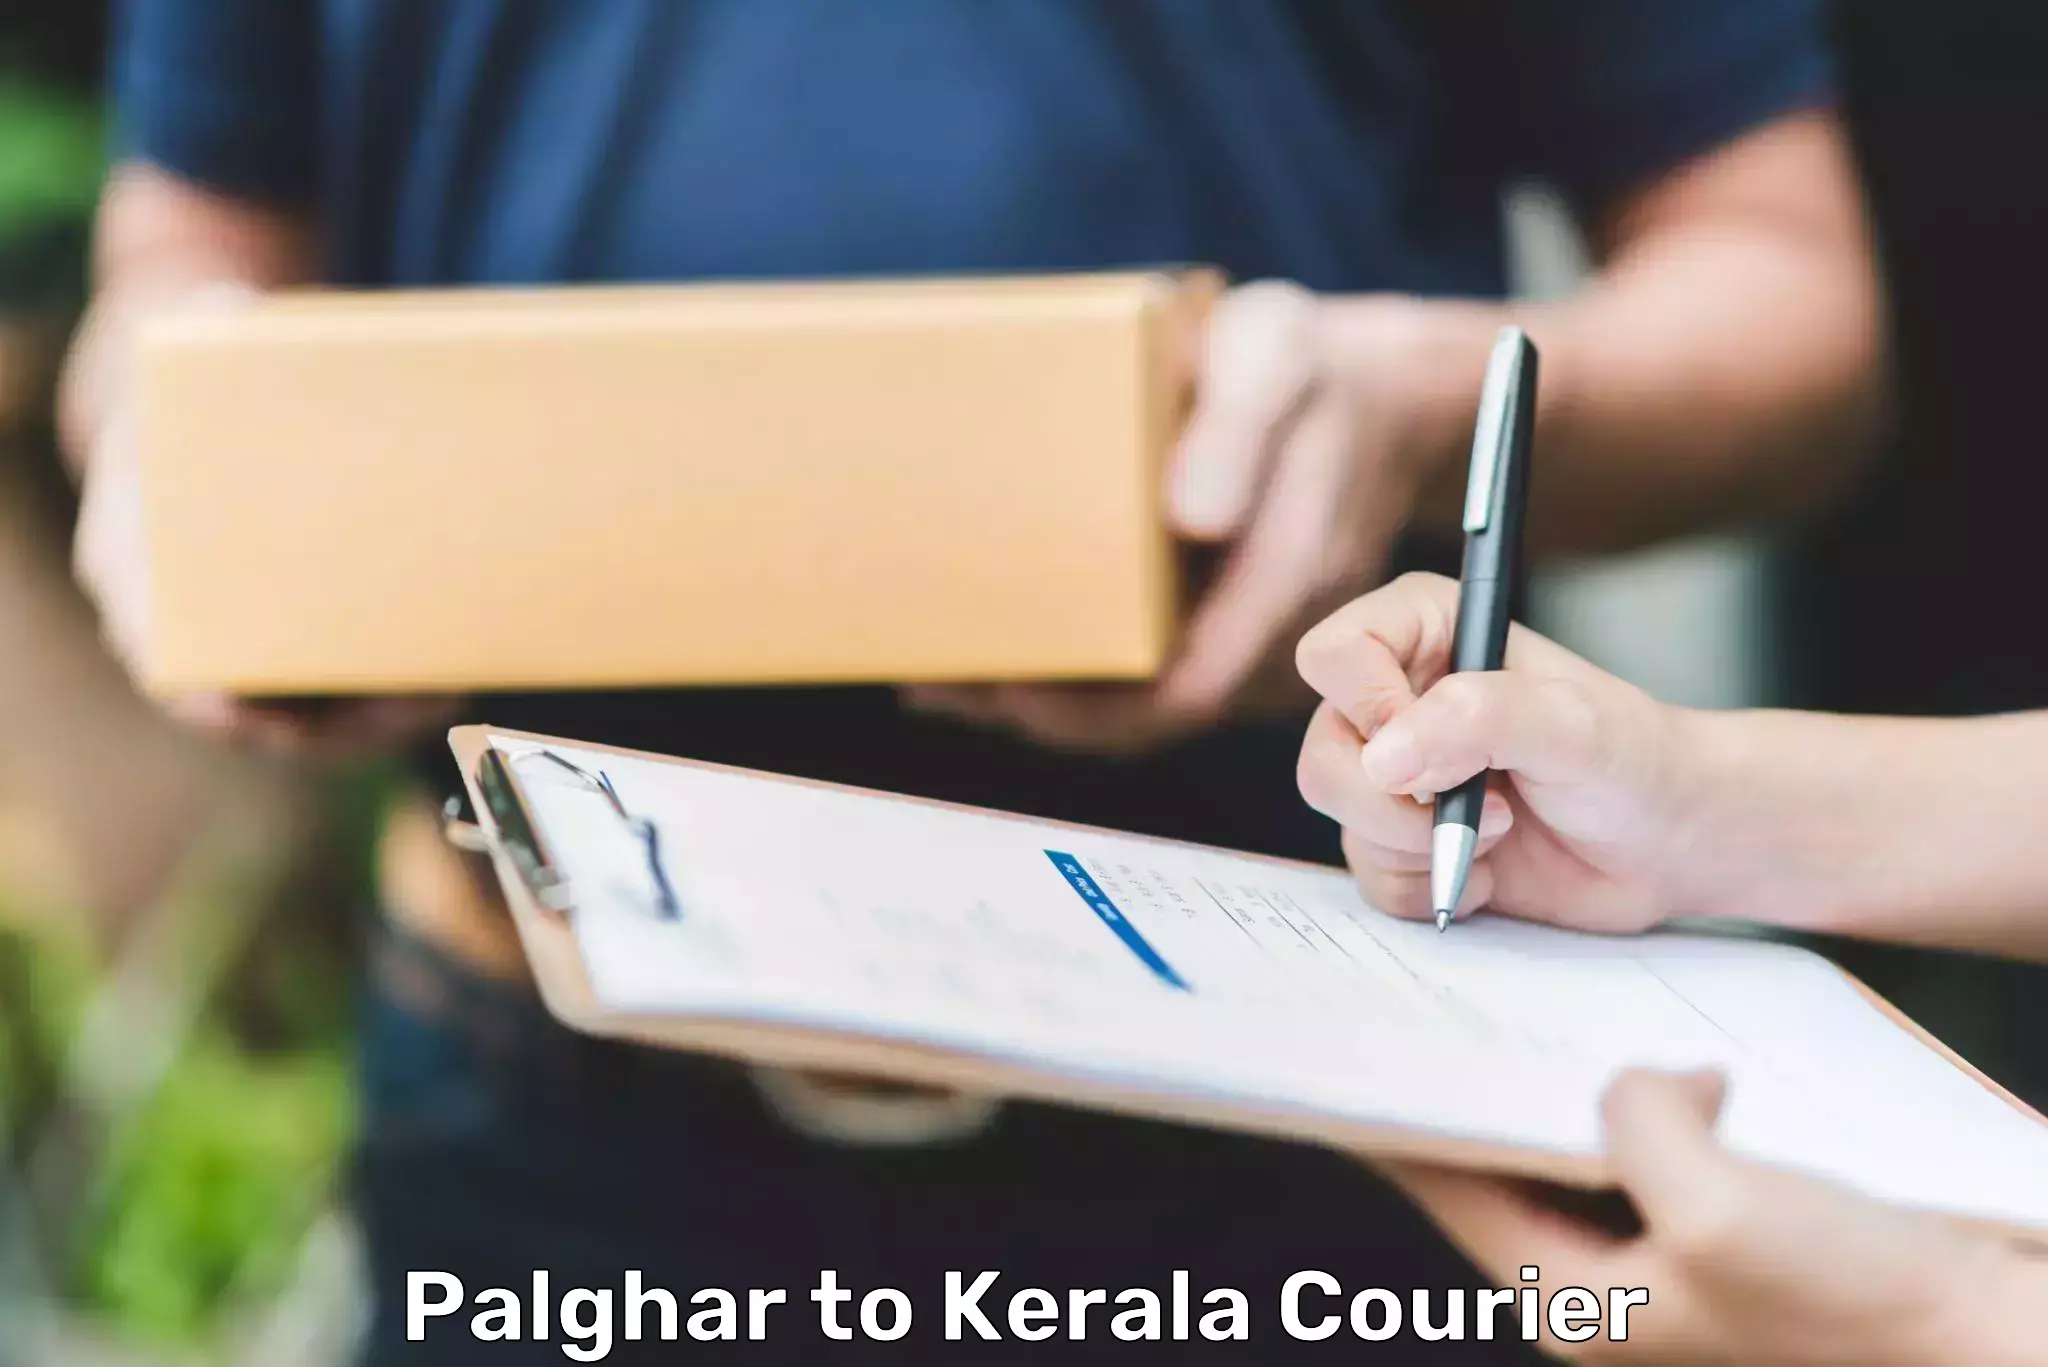 Courier service innovation Palghar to Kerala